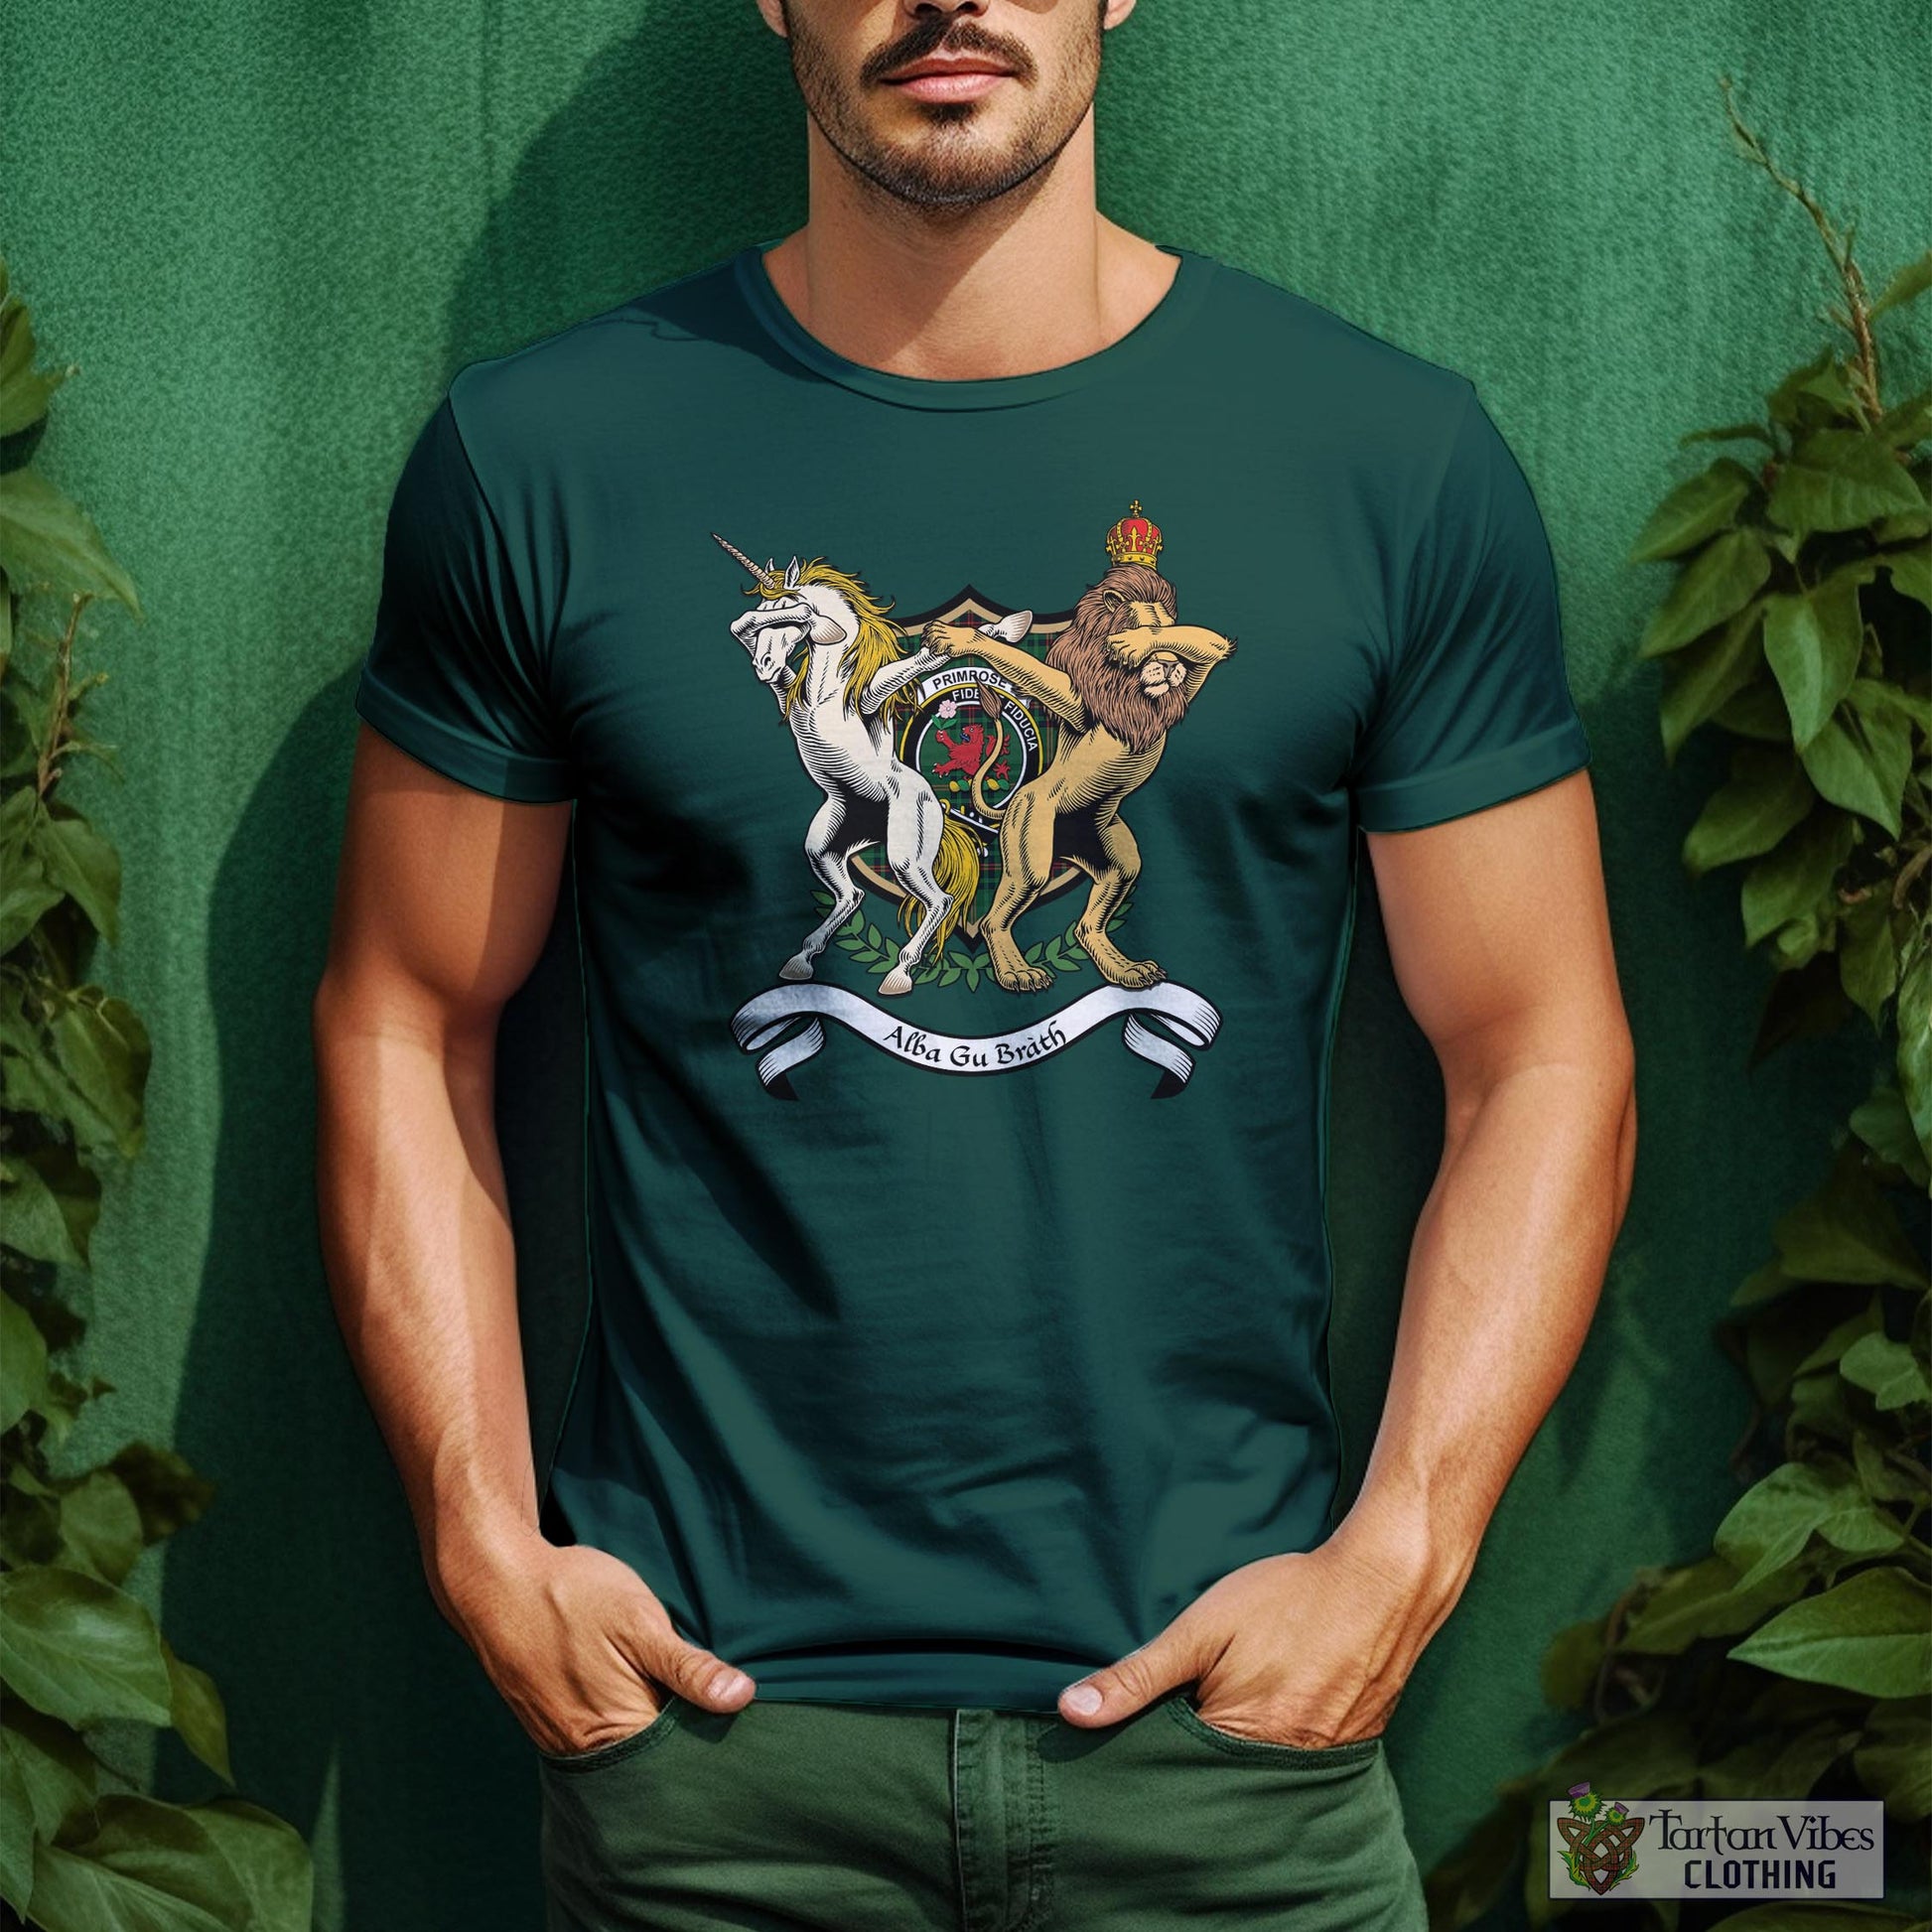 Tartan Vibes Clothing Primrose Family Crest Cotton Men's T-Shirt with Scotland Royal Coat Of Arm Funny Style